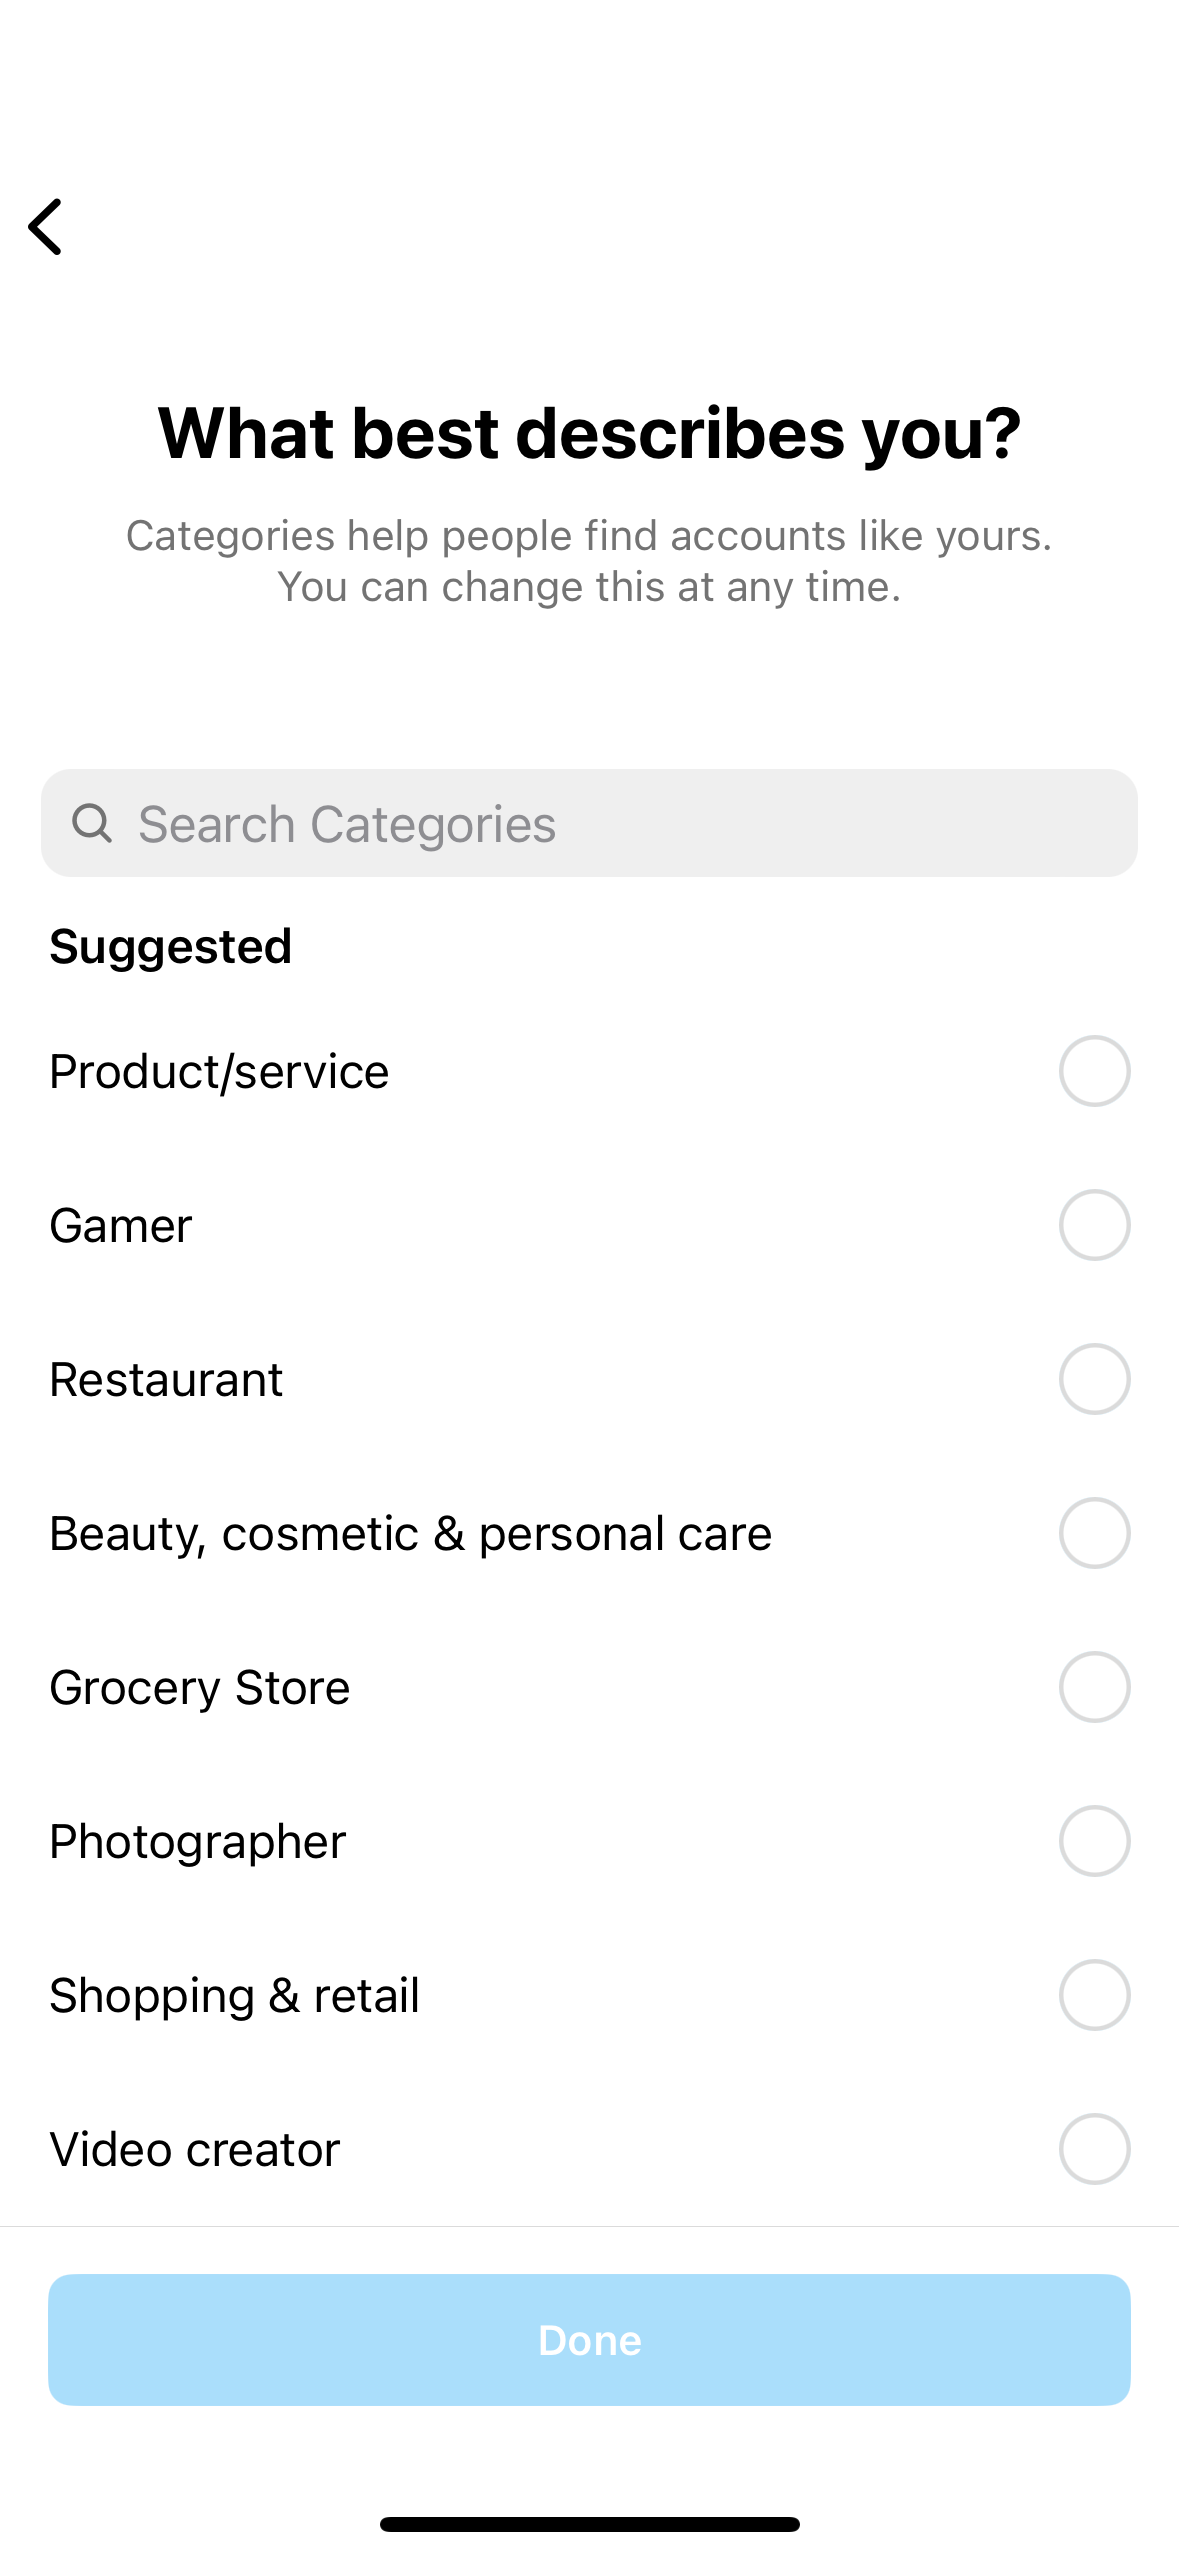 A screenshot of the Instagram Business account category menu. Menu items include suggested business categories: Product/service, gamer, restaurant, beauty/cosmetics/personal care, grocery store, photographer, shopping/retail, video creator. 